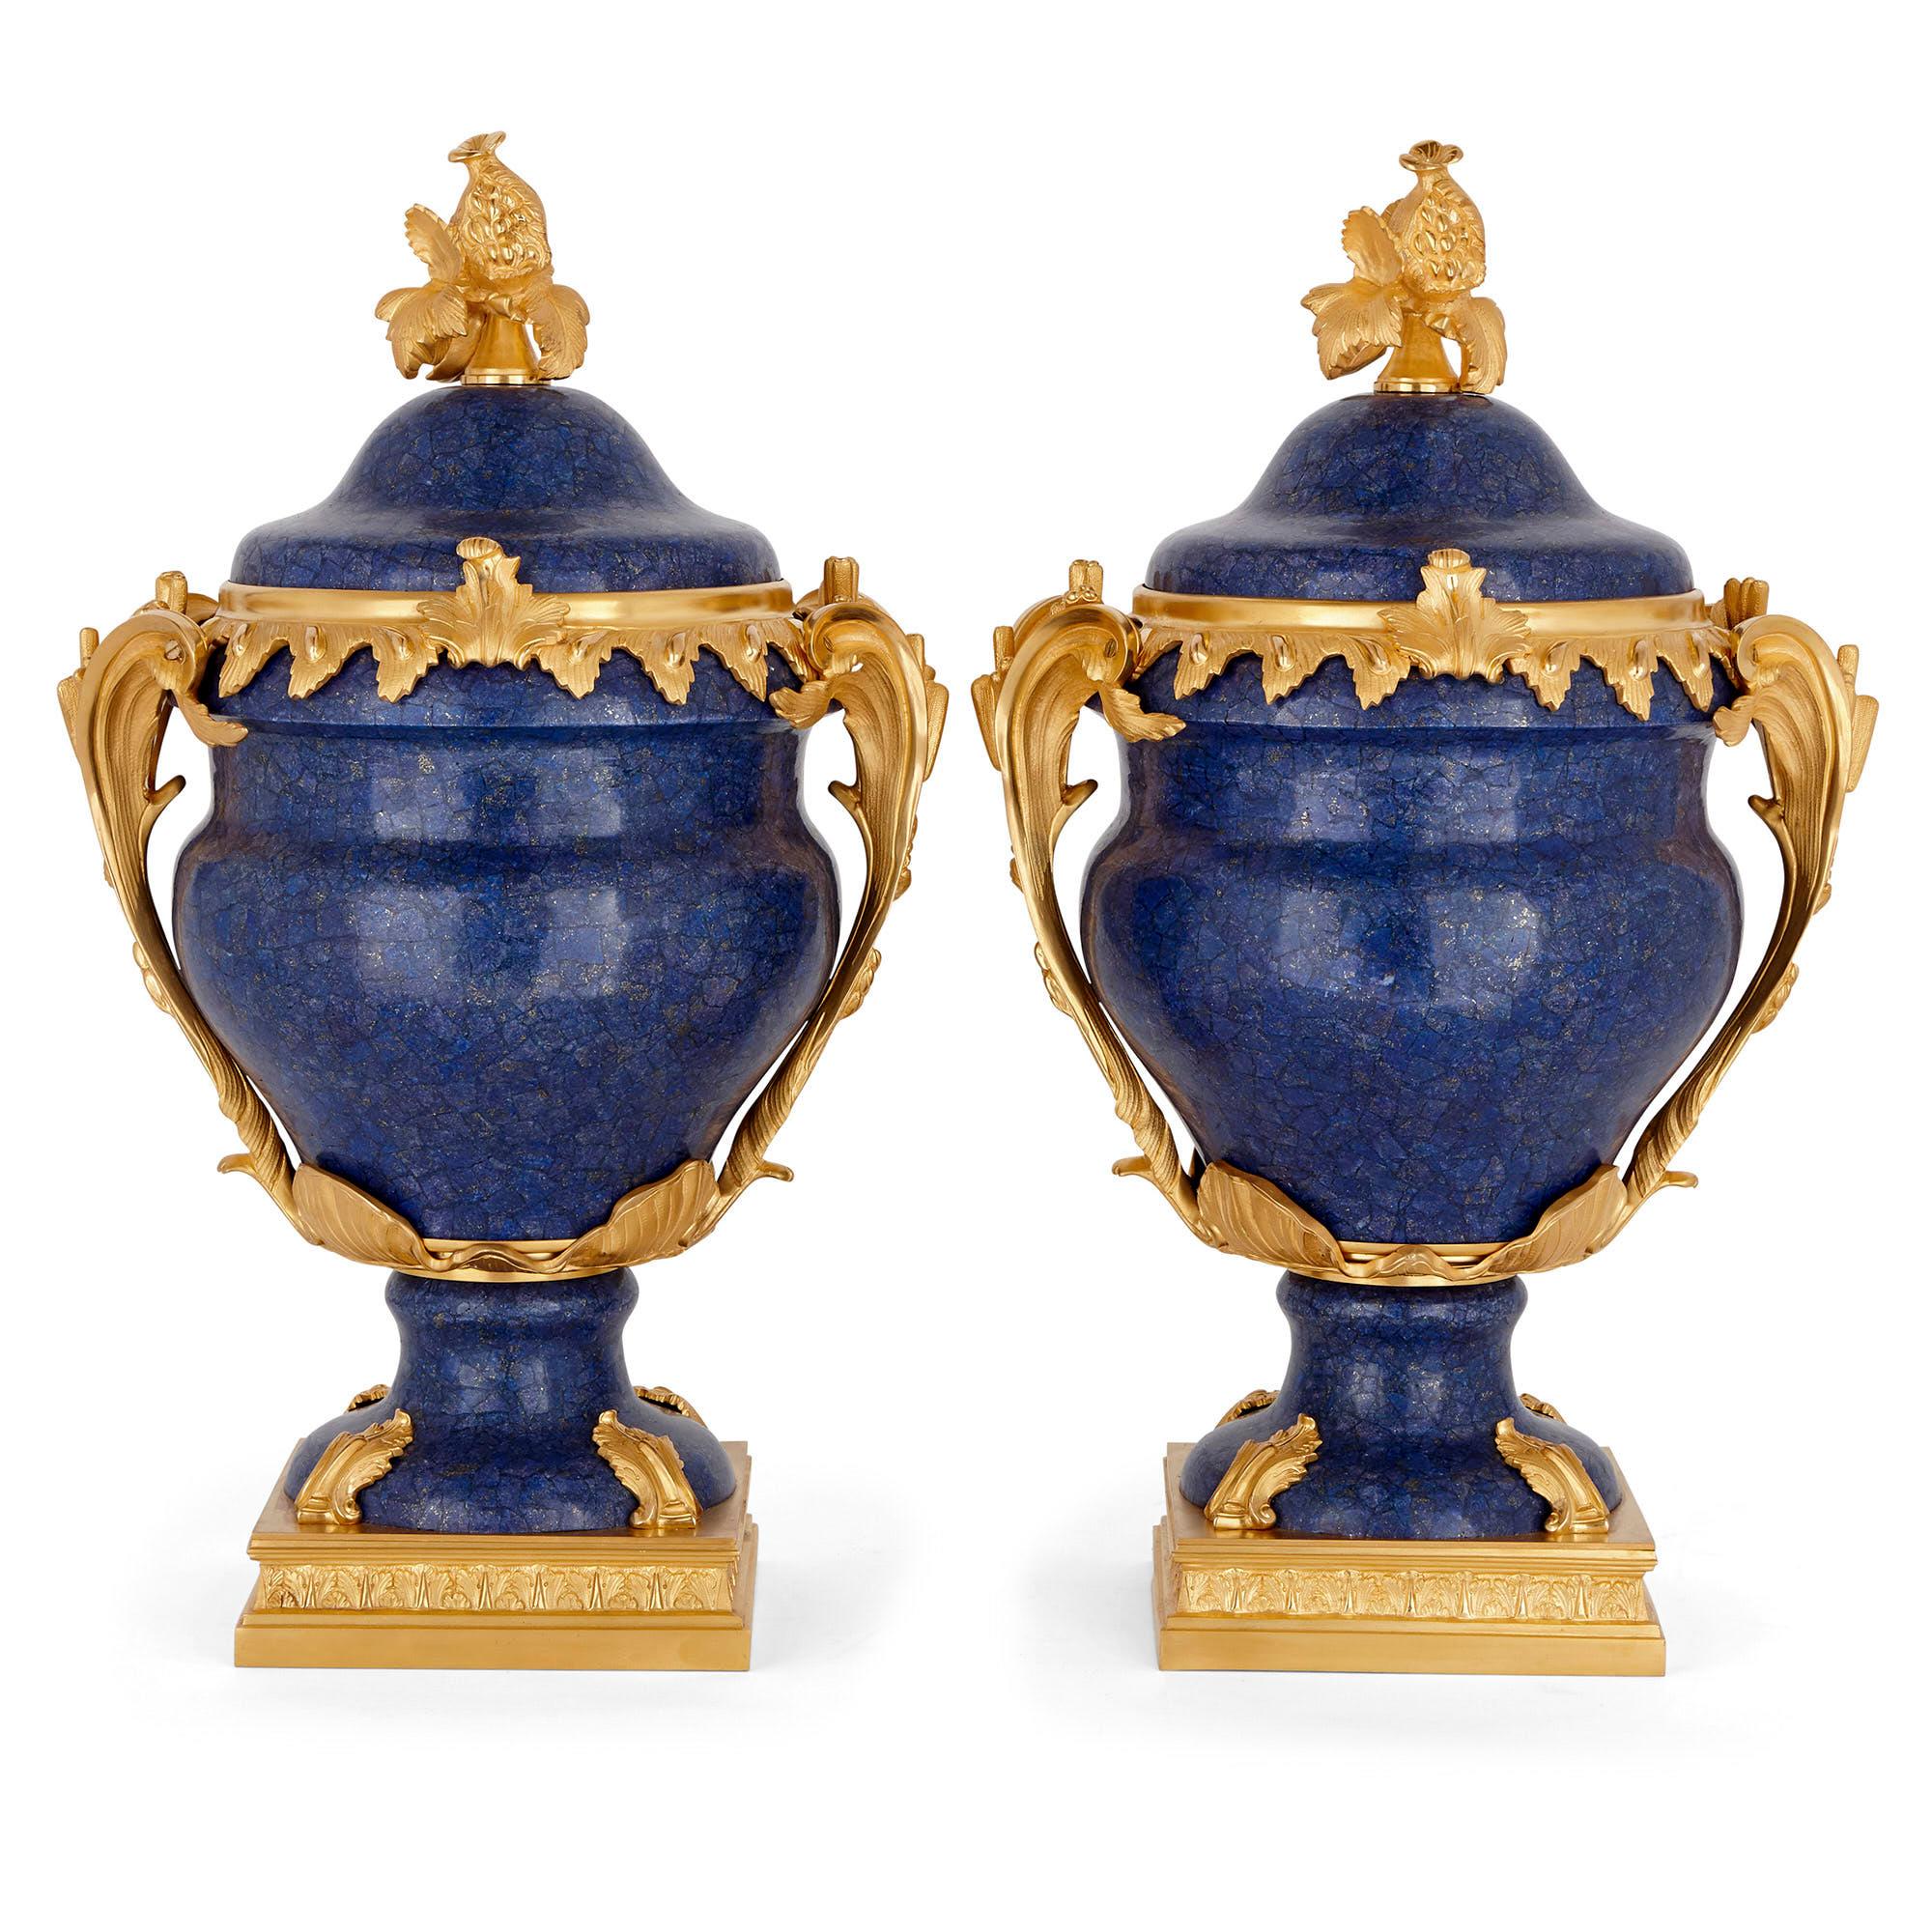 Each krater form vase in this pair is made of gilt bronze mounted lapis lazuli. The vases stand on square gilt bronze bases which attach to the feet of the vases with acanthus leaf gilt bronze mounts. From a gilt bronze band around the top of each